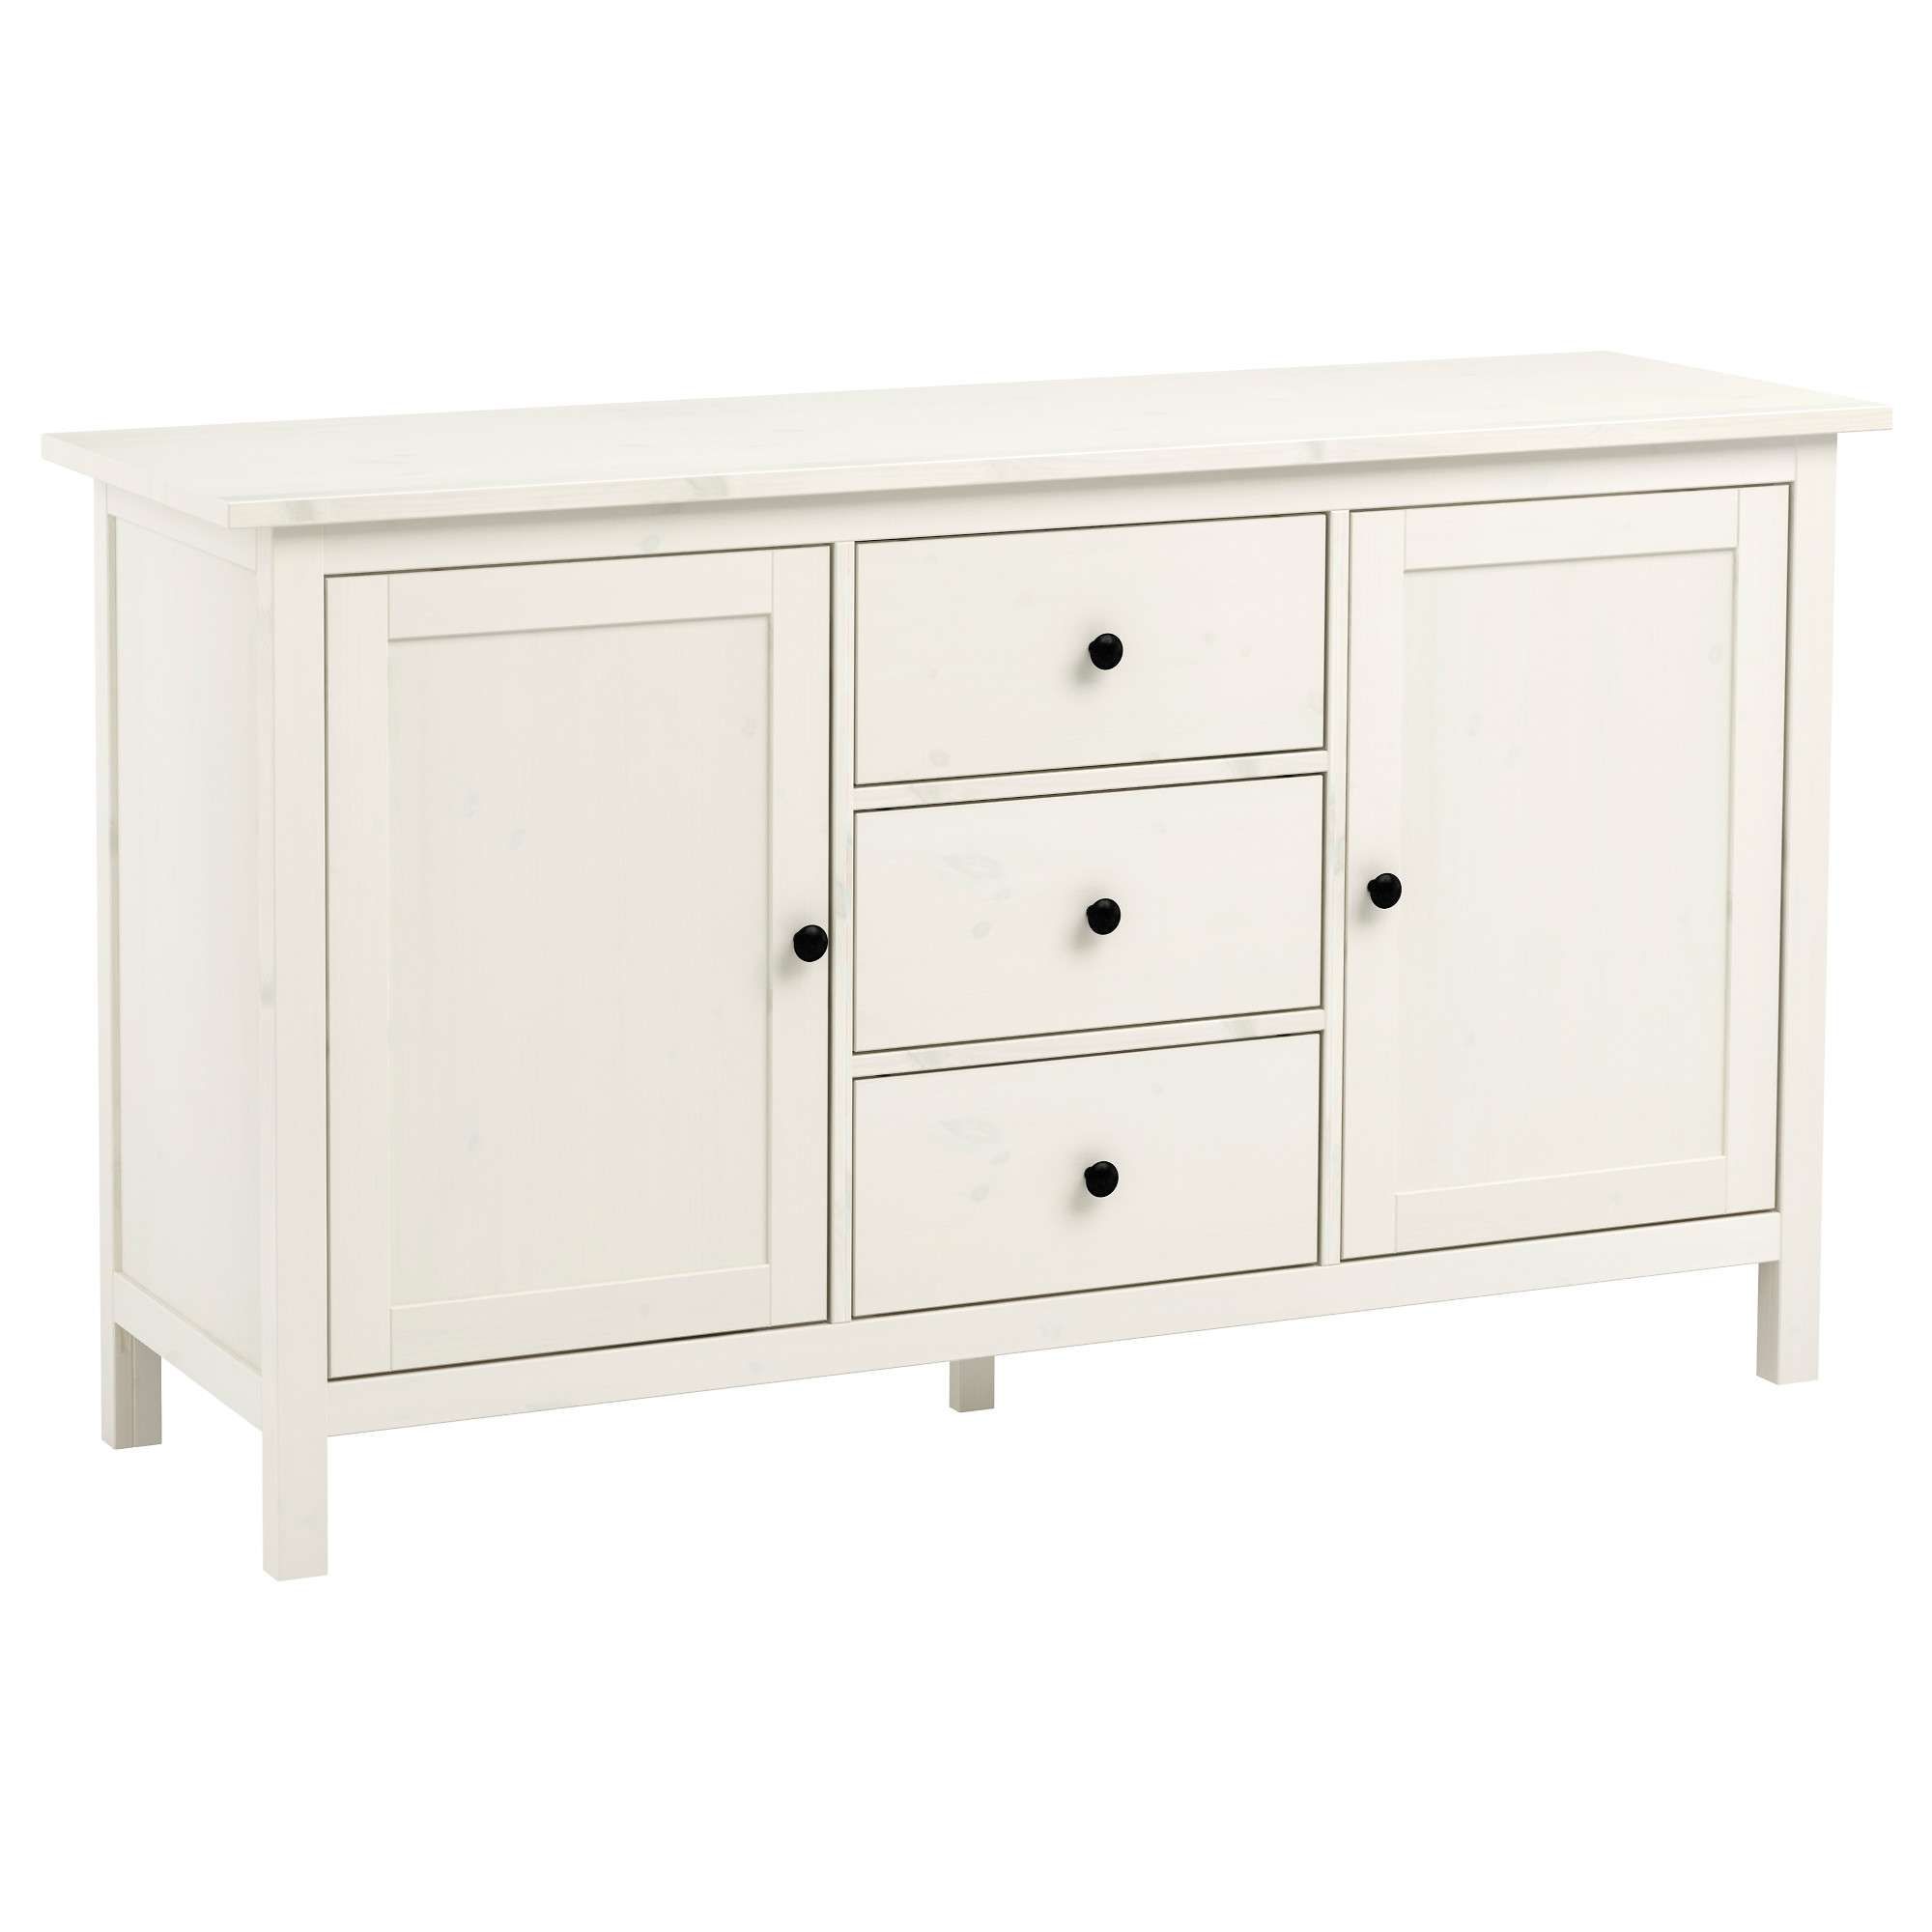 Hemnes Sideboard White Stain 157x88 Cm – Ikea With Real Wood Sideboards (Gallery 19 of 20)